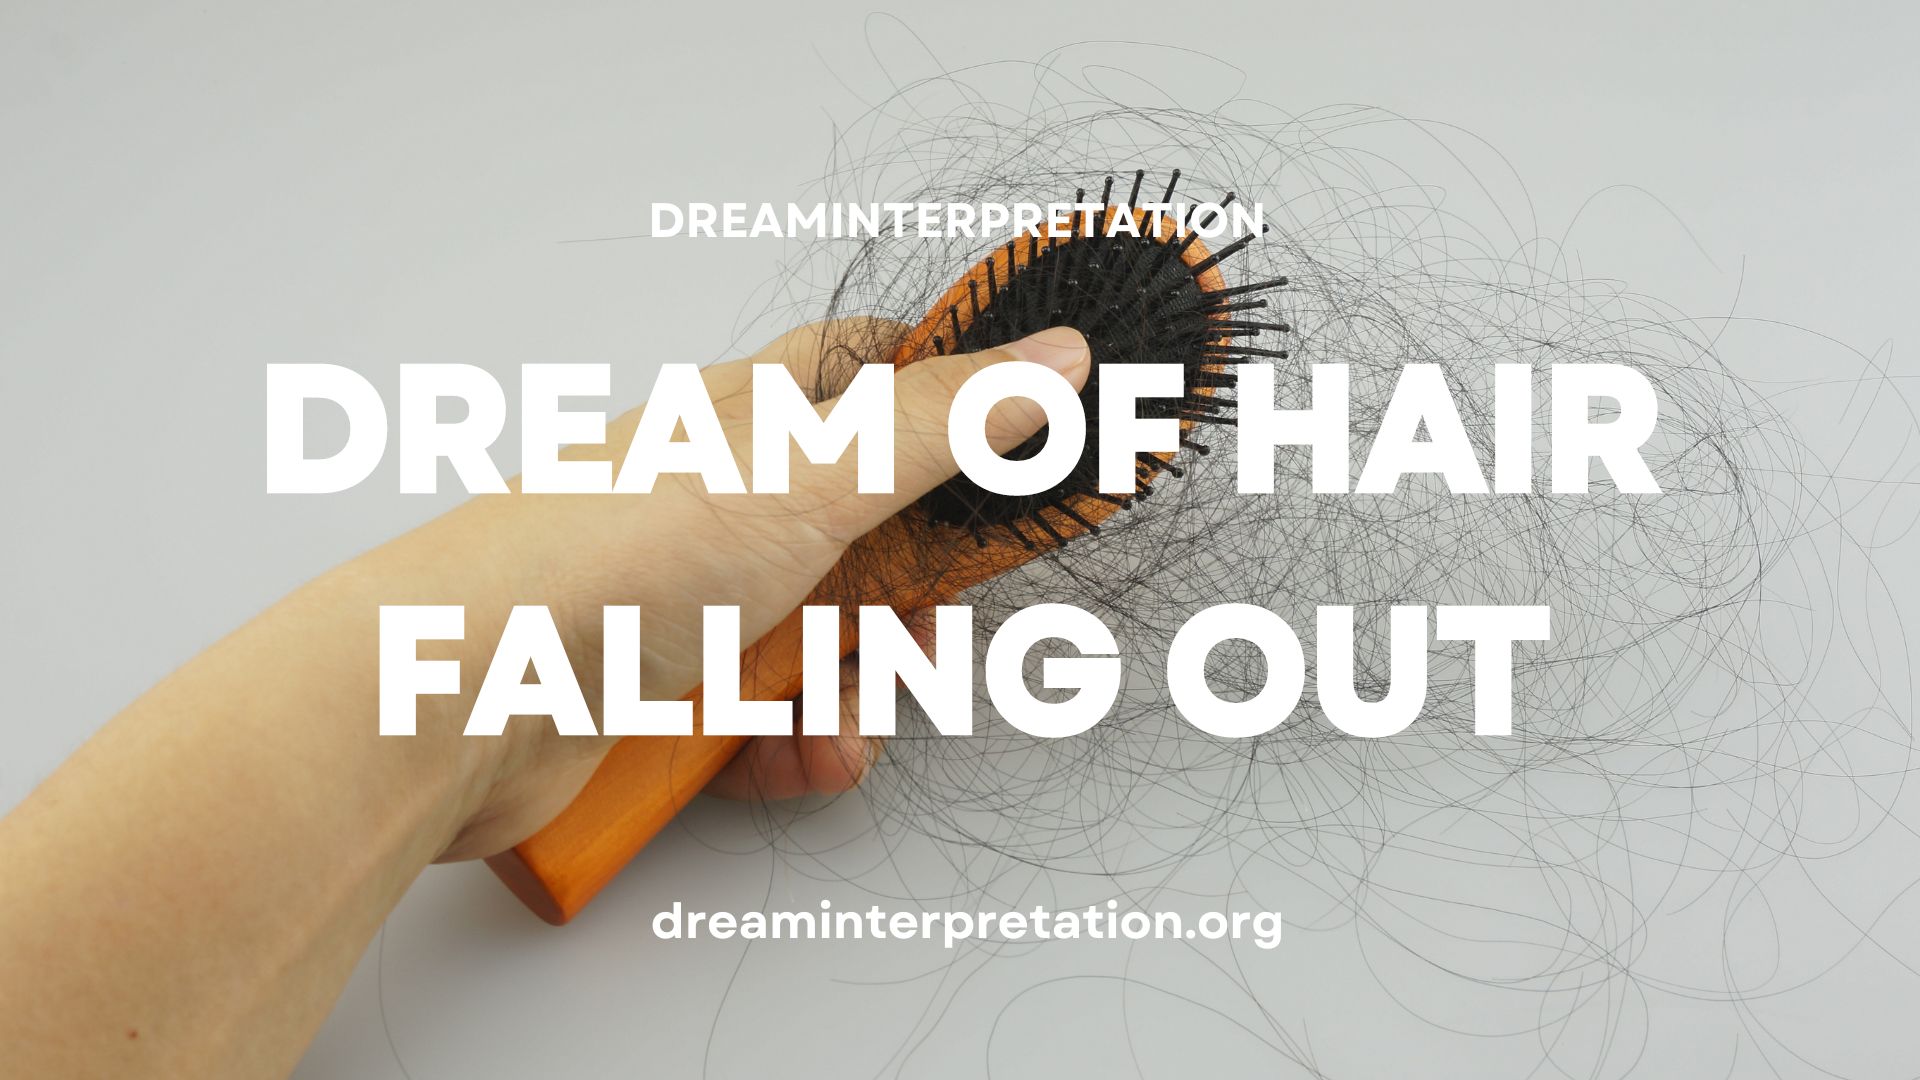 Dream of Hair Falling Out